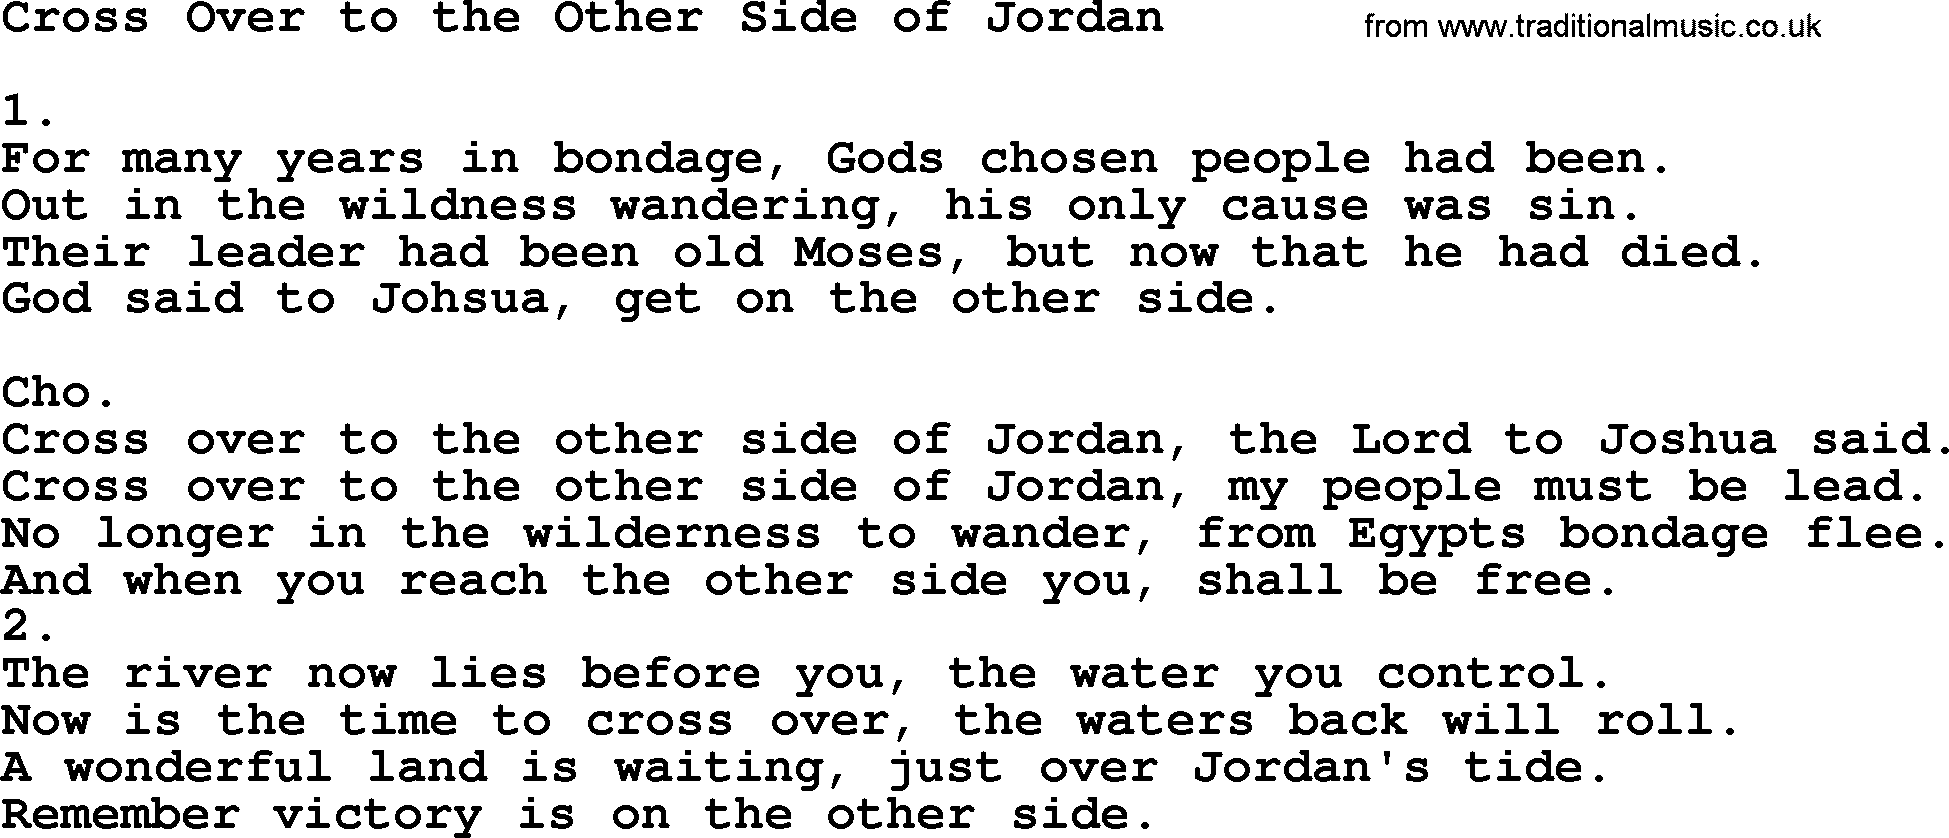 Apostolic & Pentecostal Hymns and Songs, Hymn: Cross Over to the Other Side of Jordan lyrics and PDF